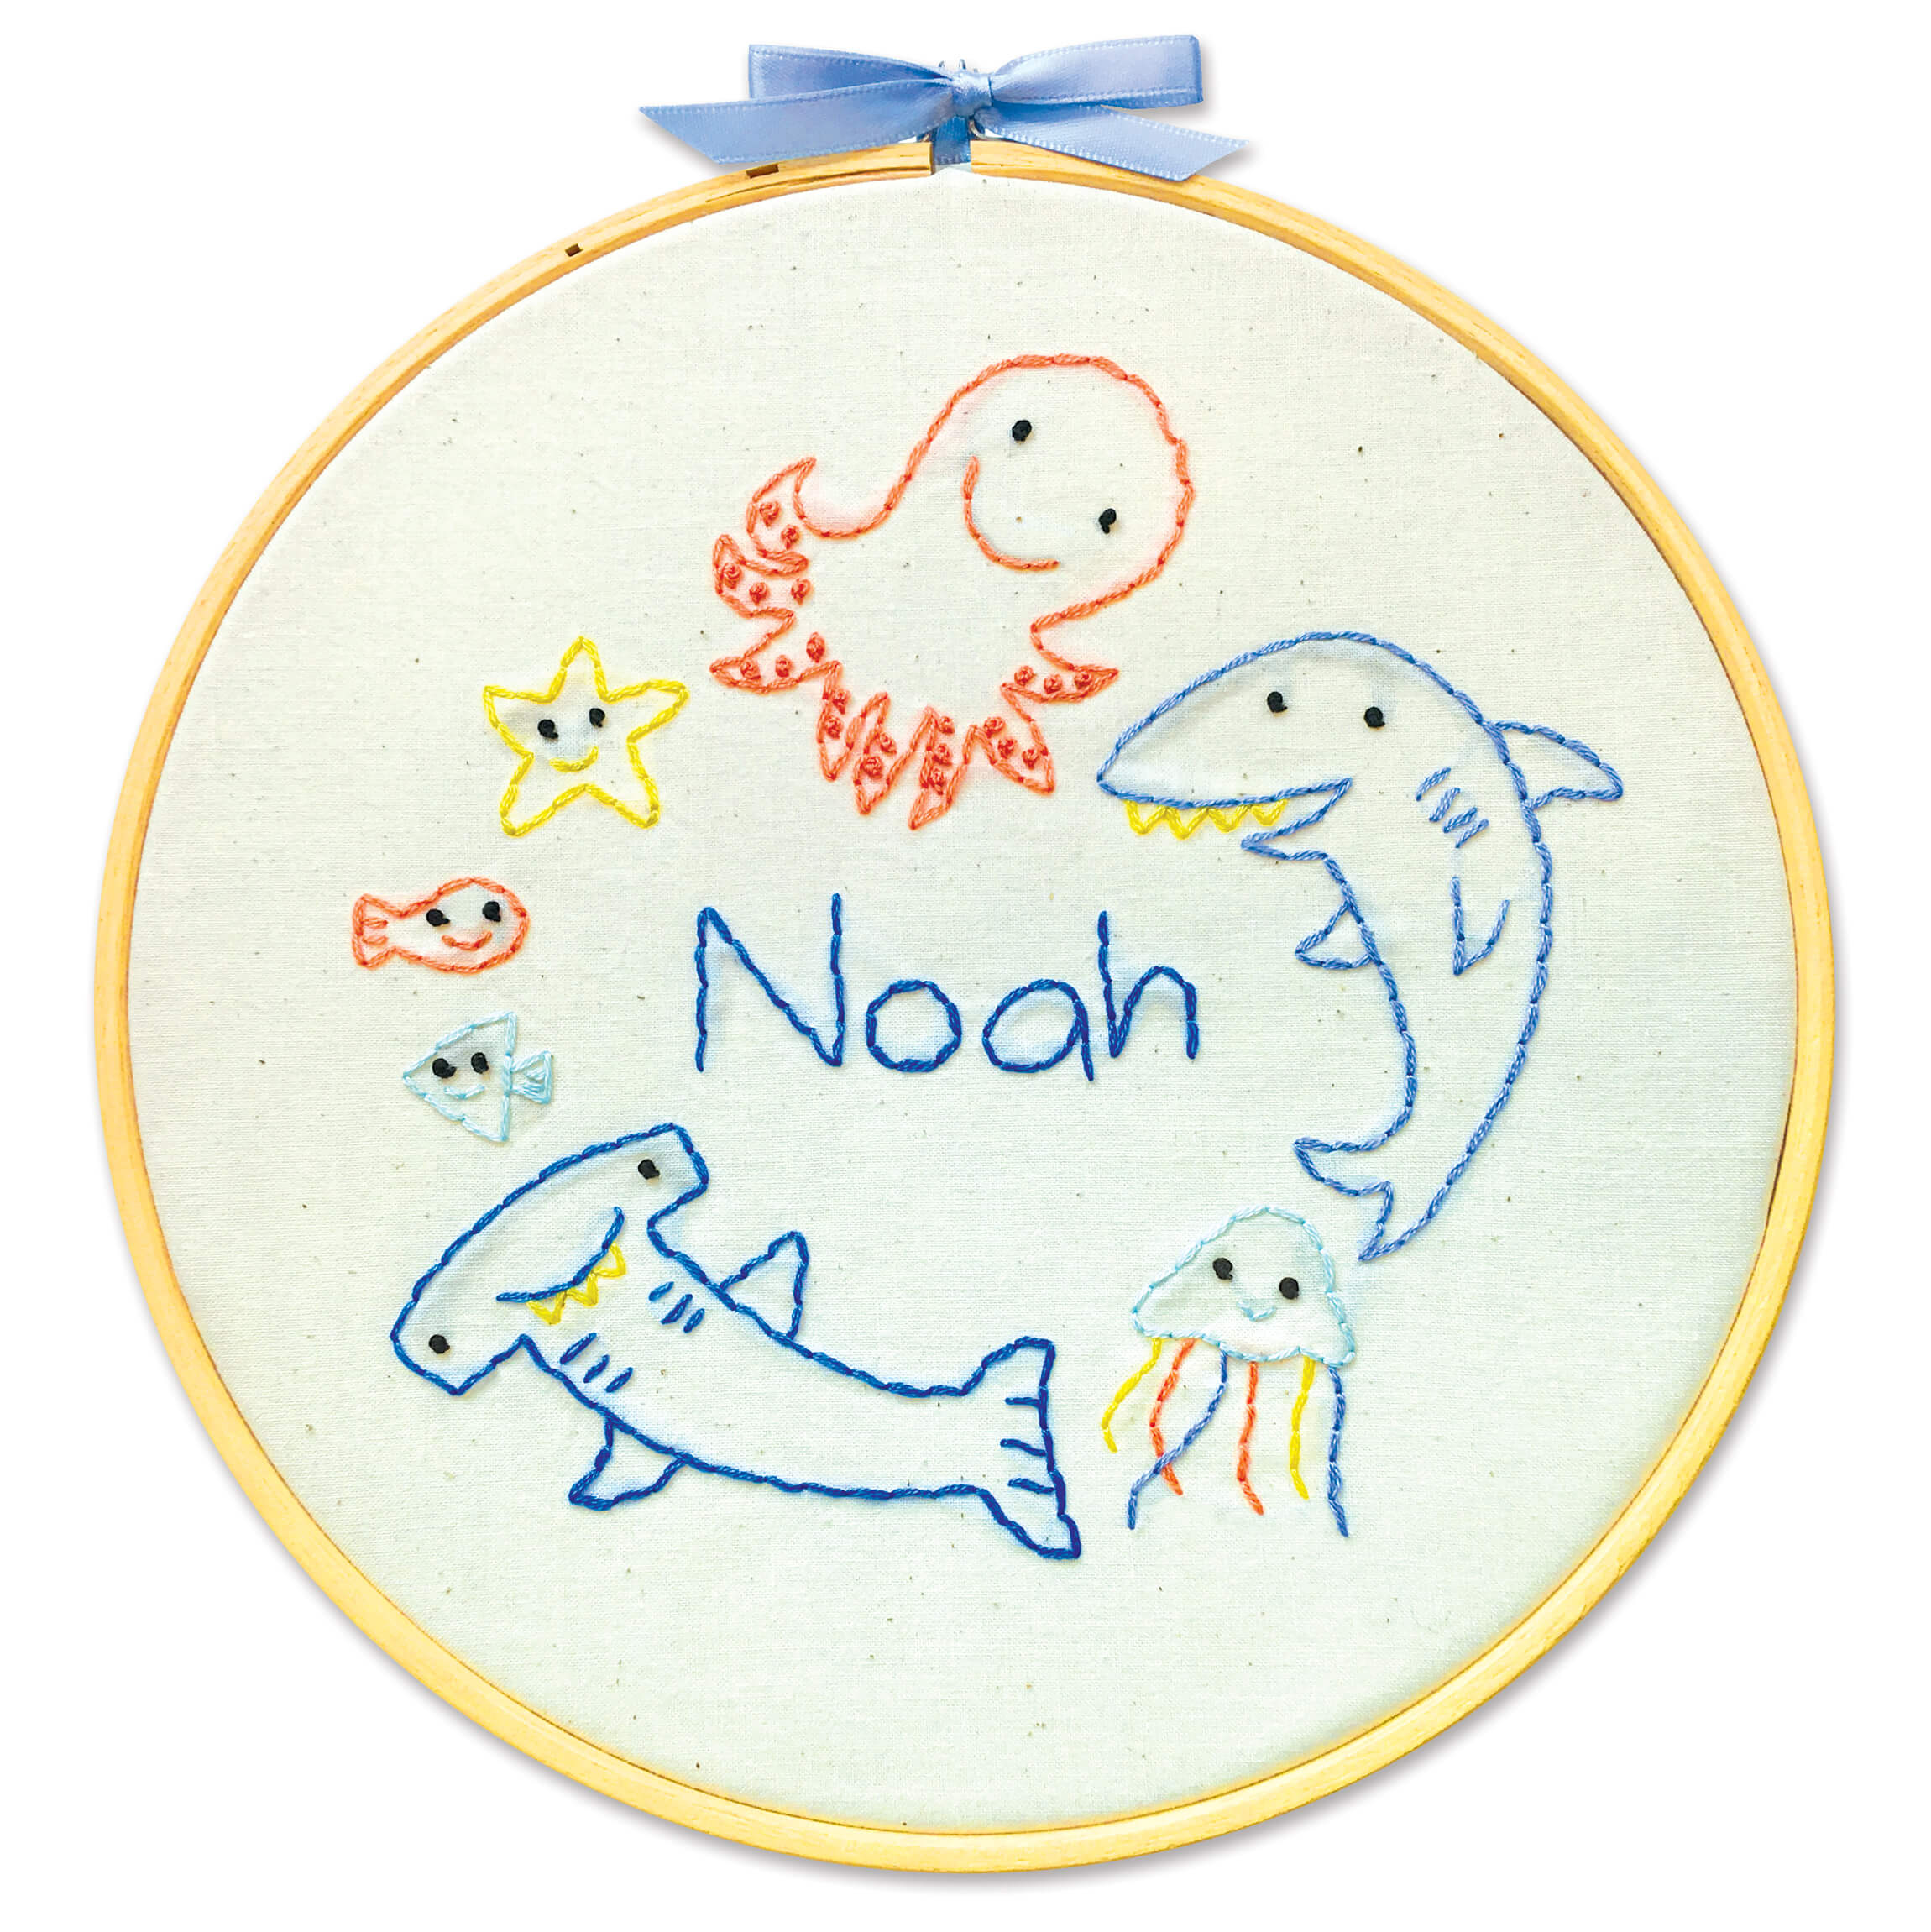 Fishies embroidery pattern shown in an 8-inch hoop